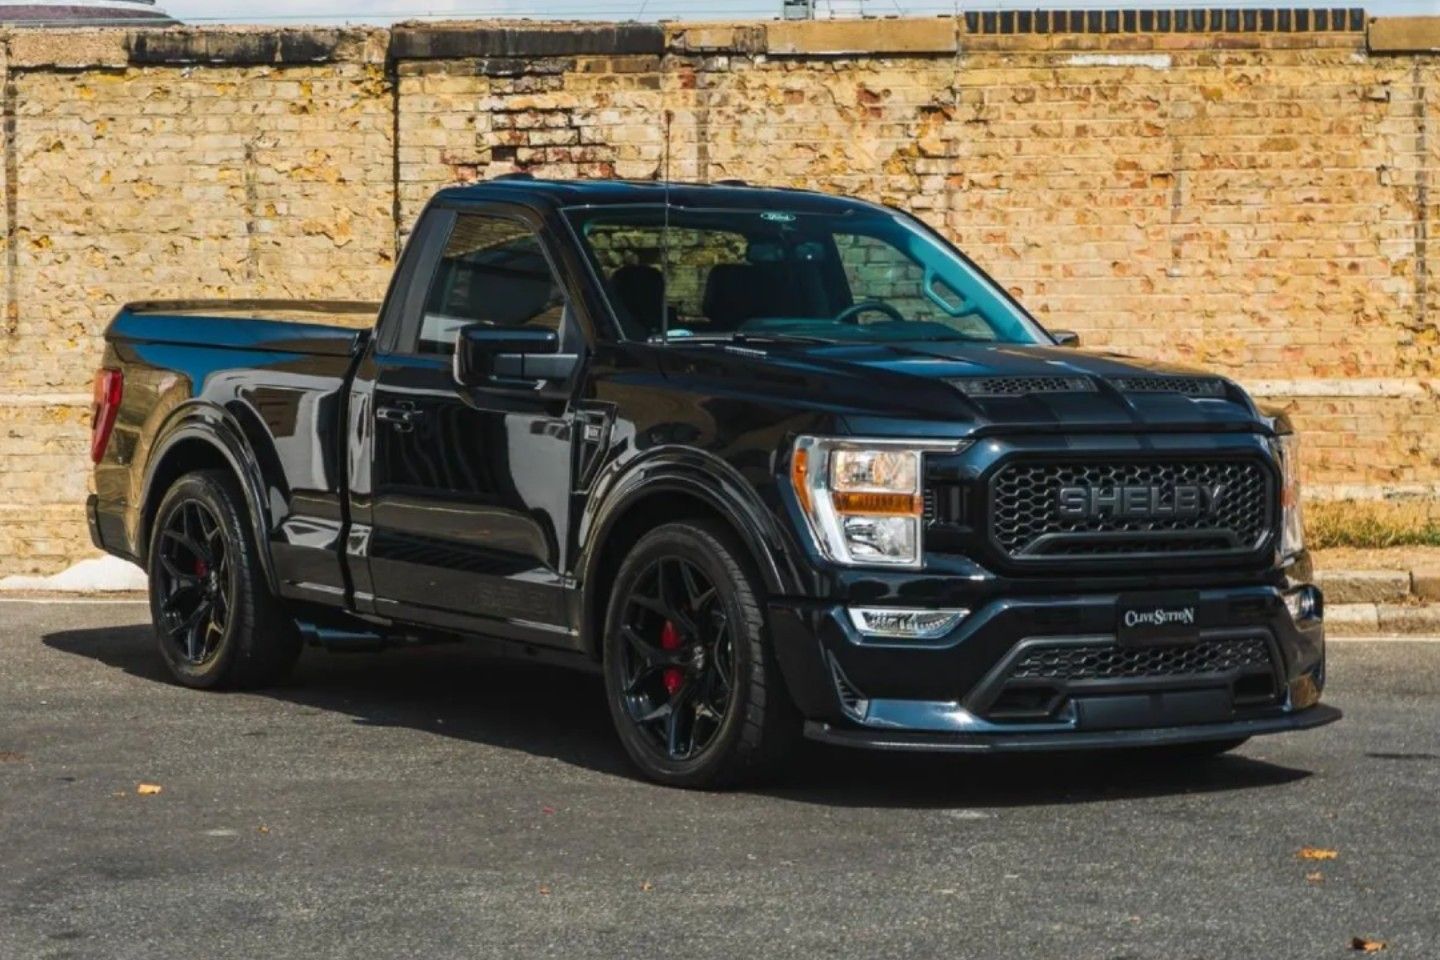 770hp Ford F150 Shelby Super Snake Sport for sale PistonHeads UK